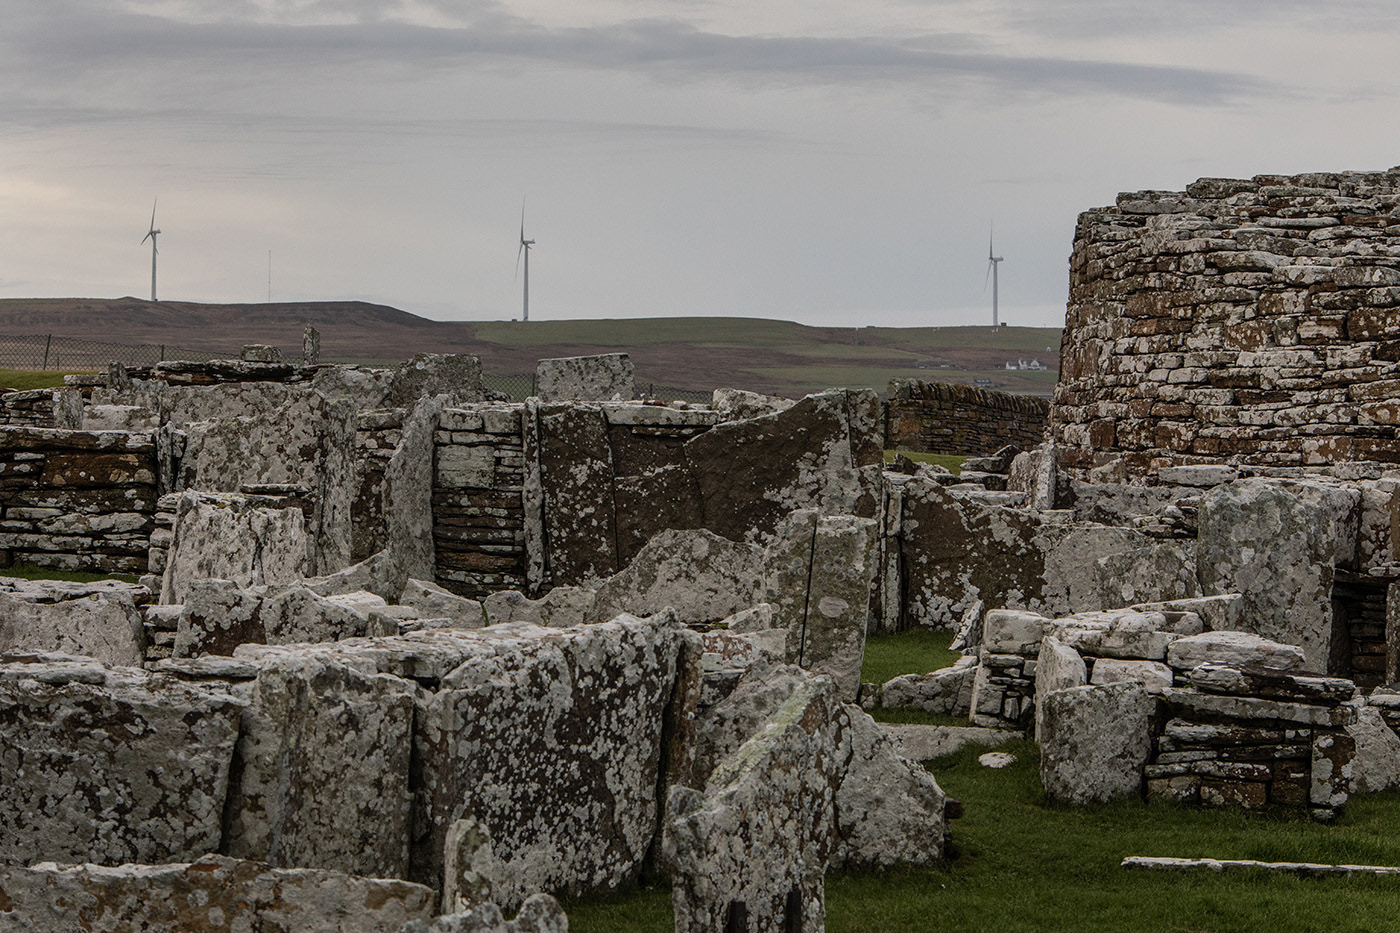 wind turbines on hillside with neolithic ruins in foreground